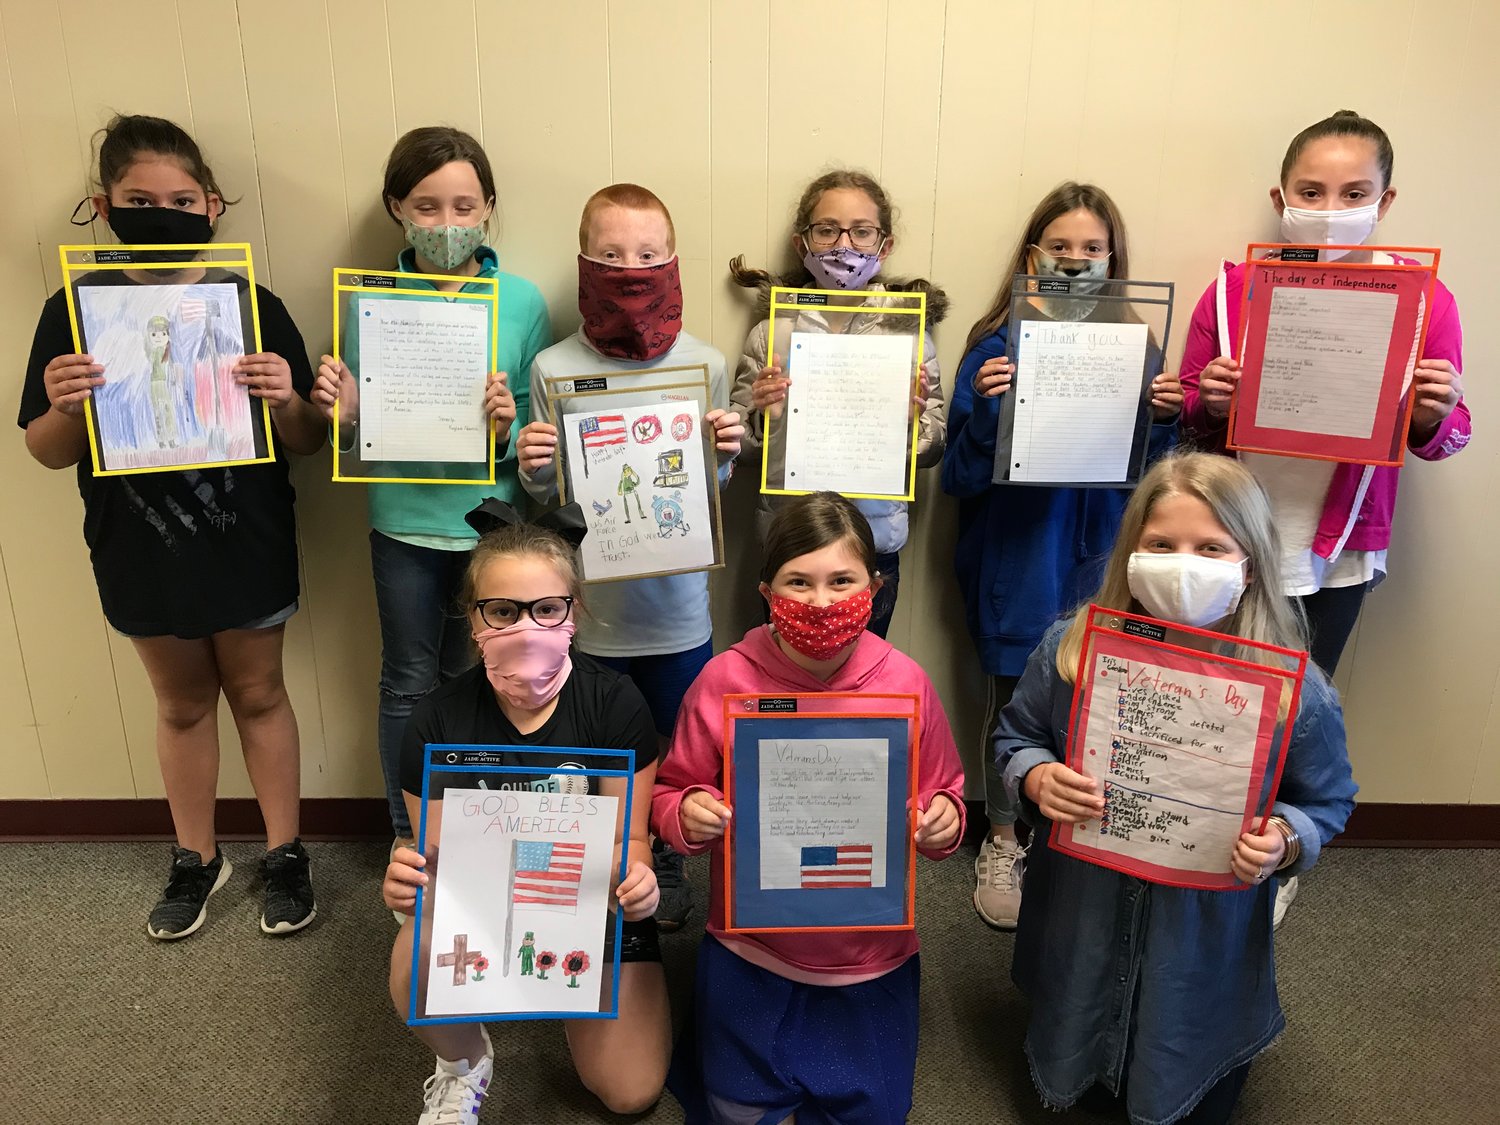 Winners of the Mineola Pilot Club patriotic challenge were, back from left, Lilah Dougherty, Kaylee Nance, J.D. McGough, Julieane Hoff, Bella Exner and Paislee Hall; and, front, Kinsler Bowker, Callee White and Iris Goodson. (Courtesy photo)